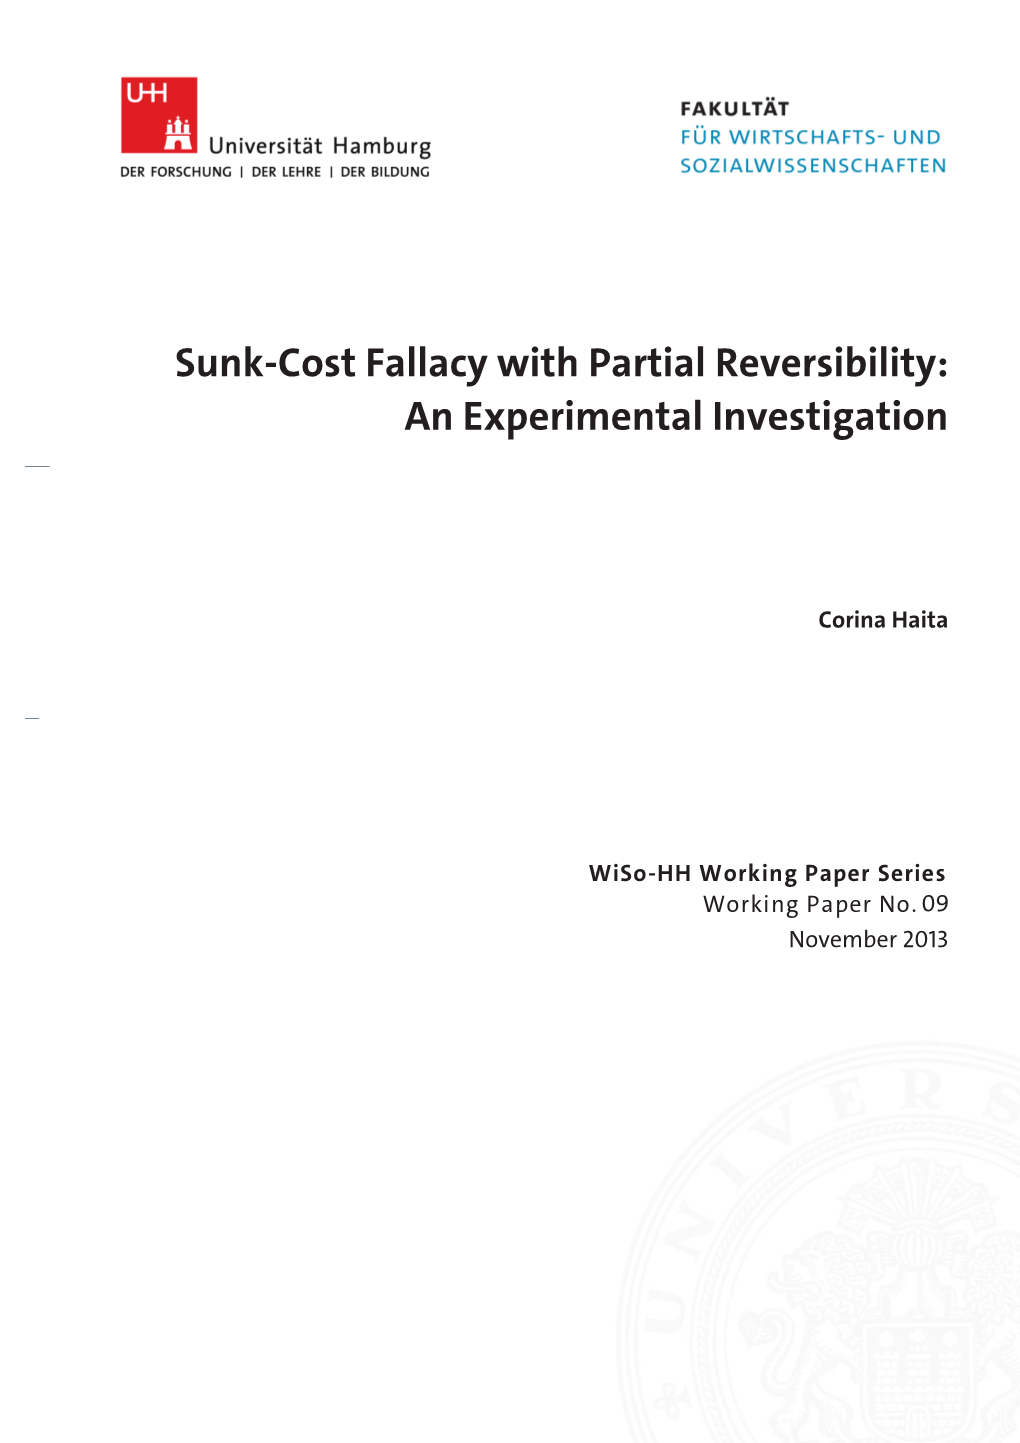 Sunk-Cost Fallacy with Partial Reversibility: an Experimental Investigation